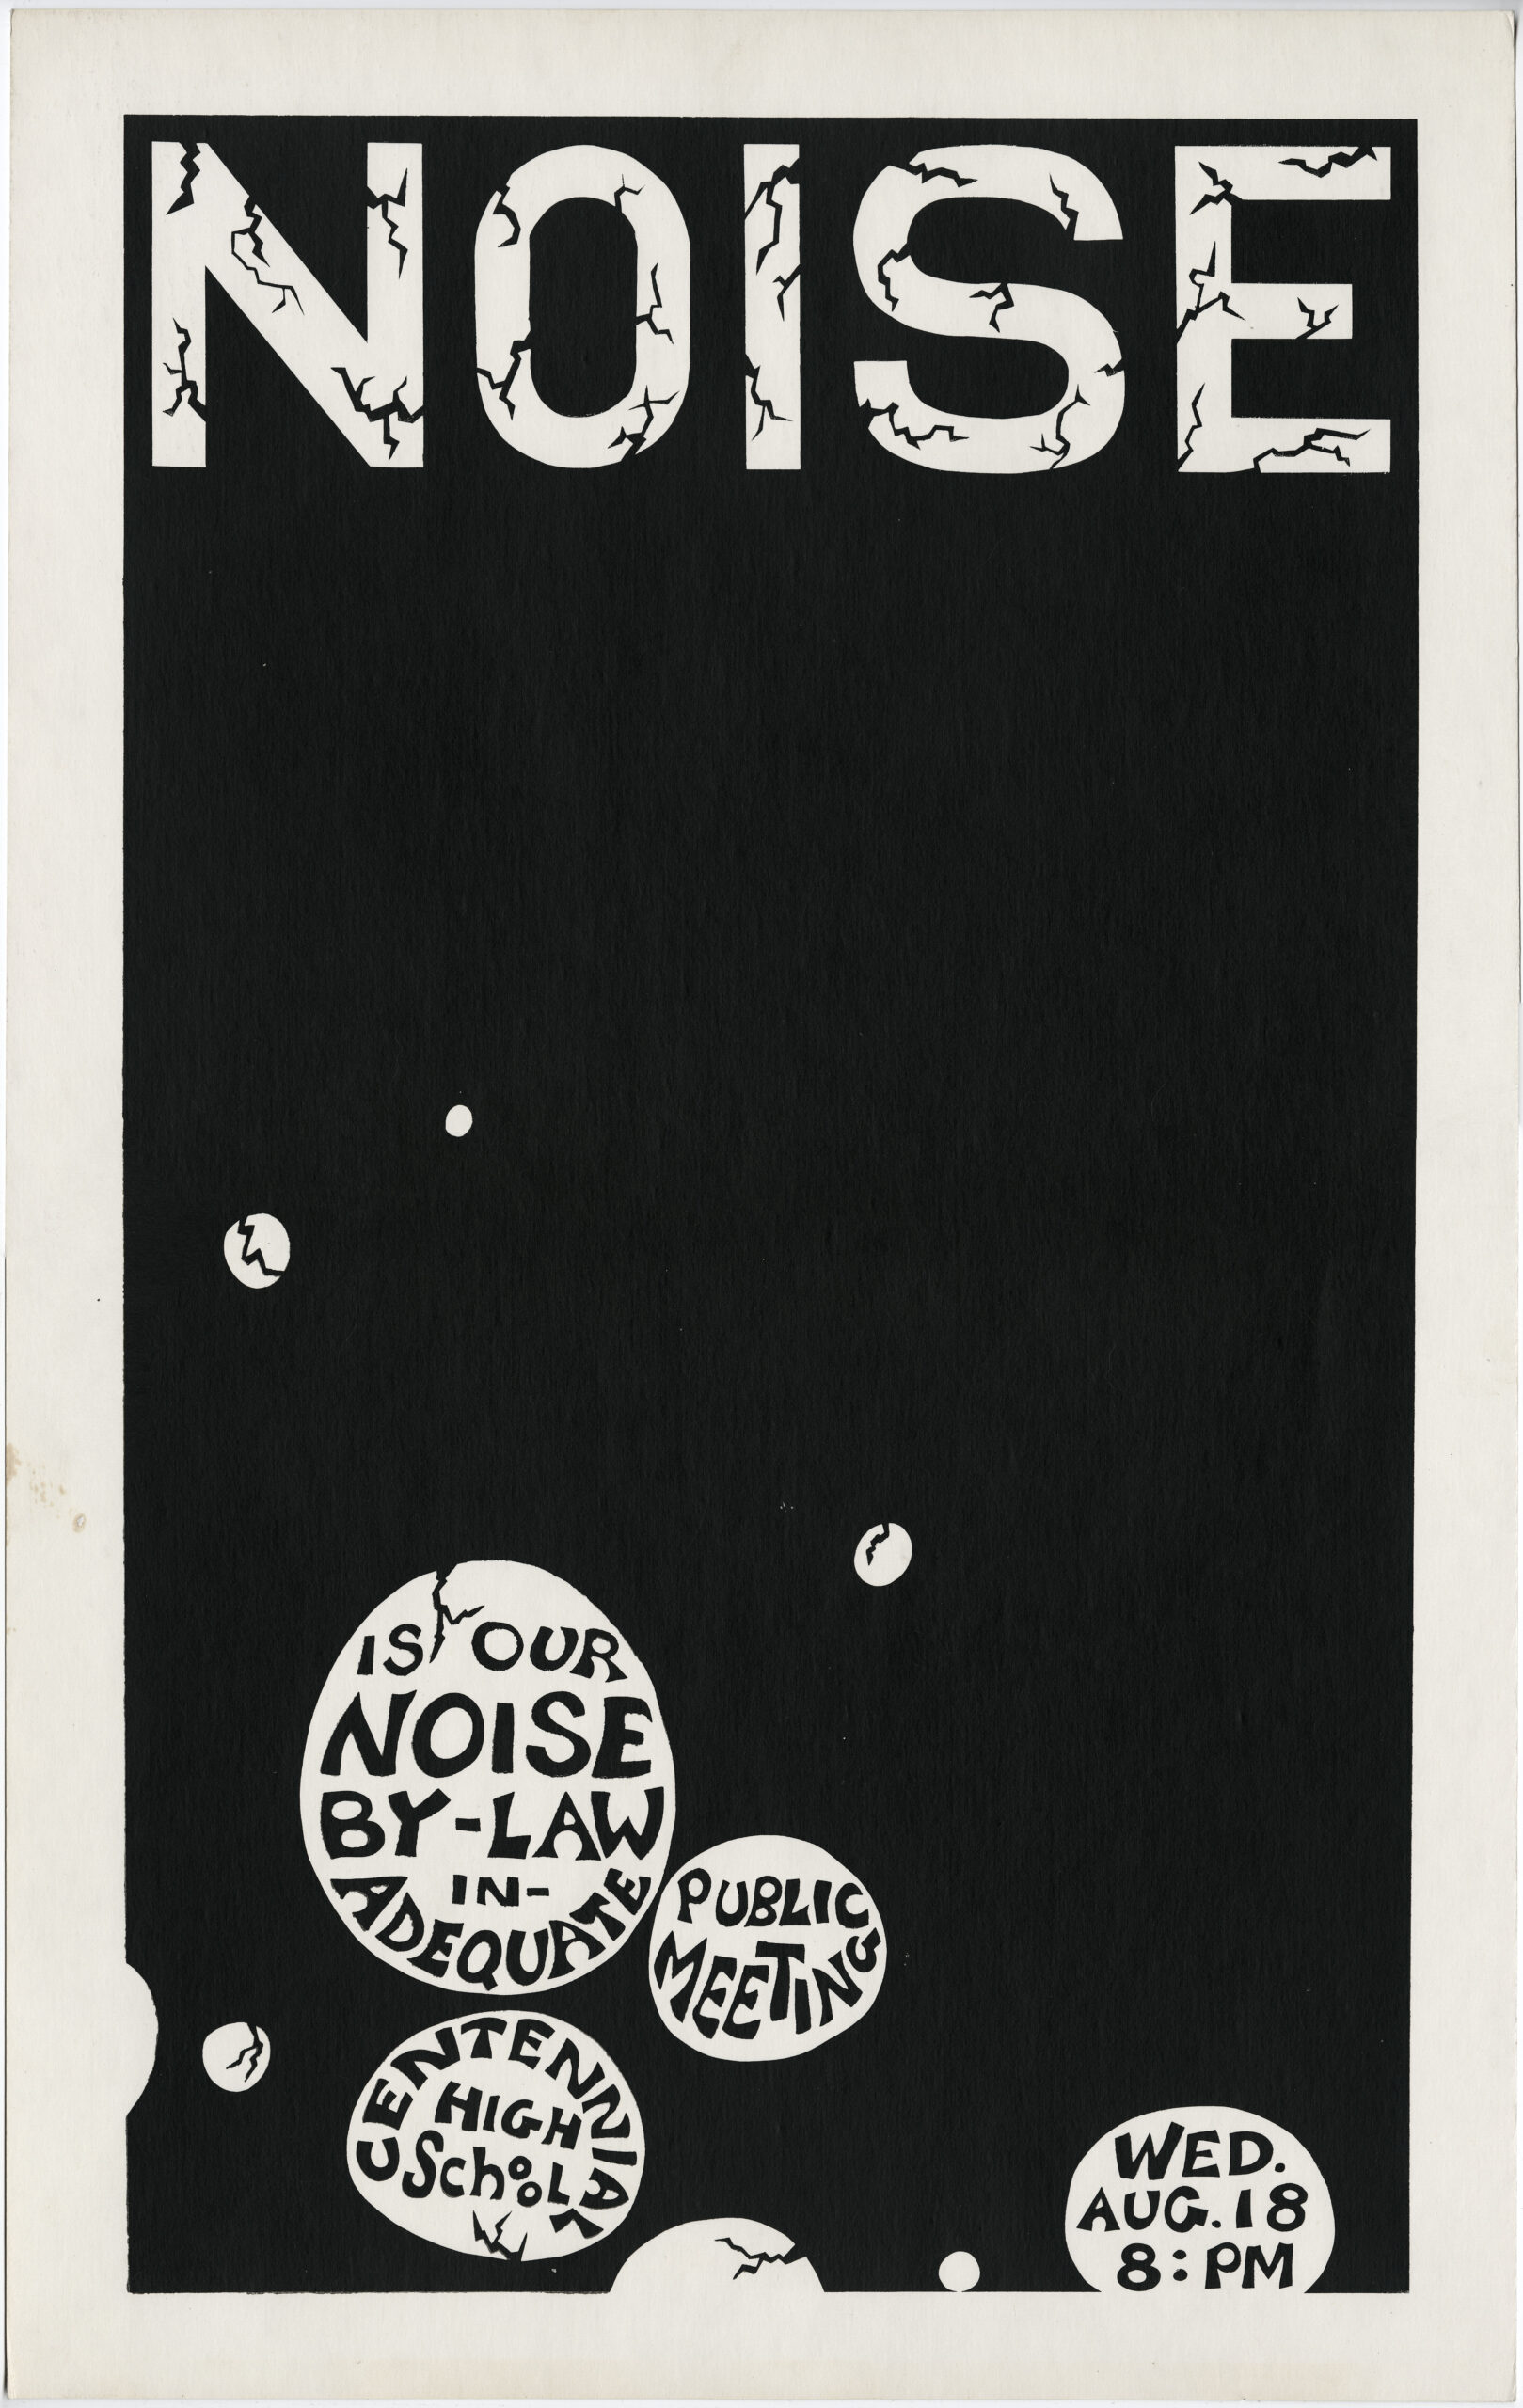 SPEC poster for their noise pollution campaign, ca. 1971. Reference code: AM1556-S6.
 
